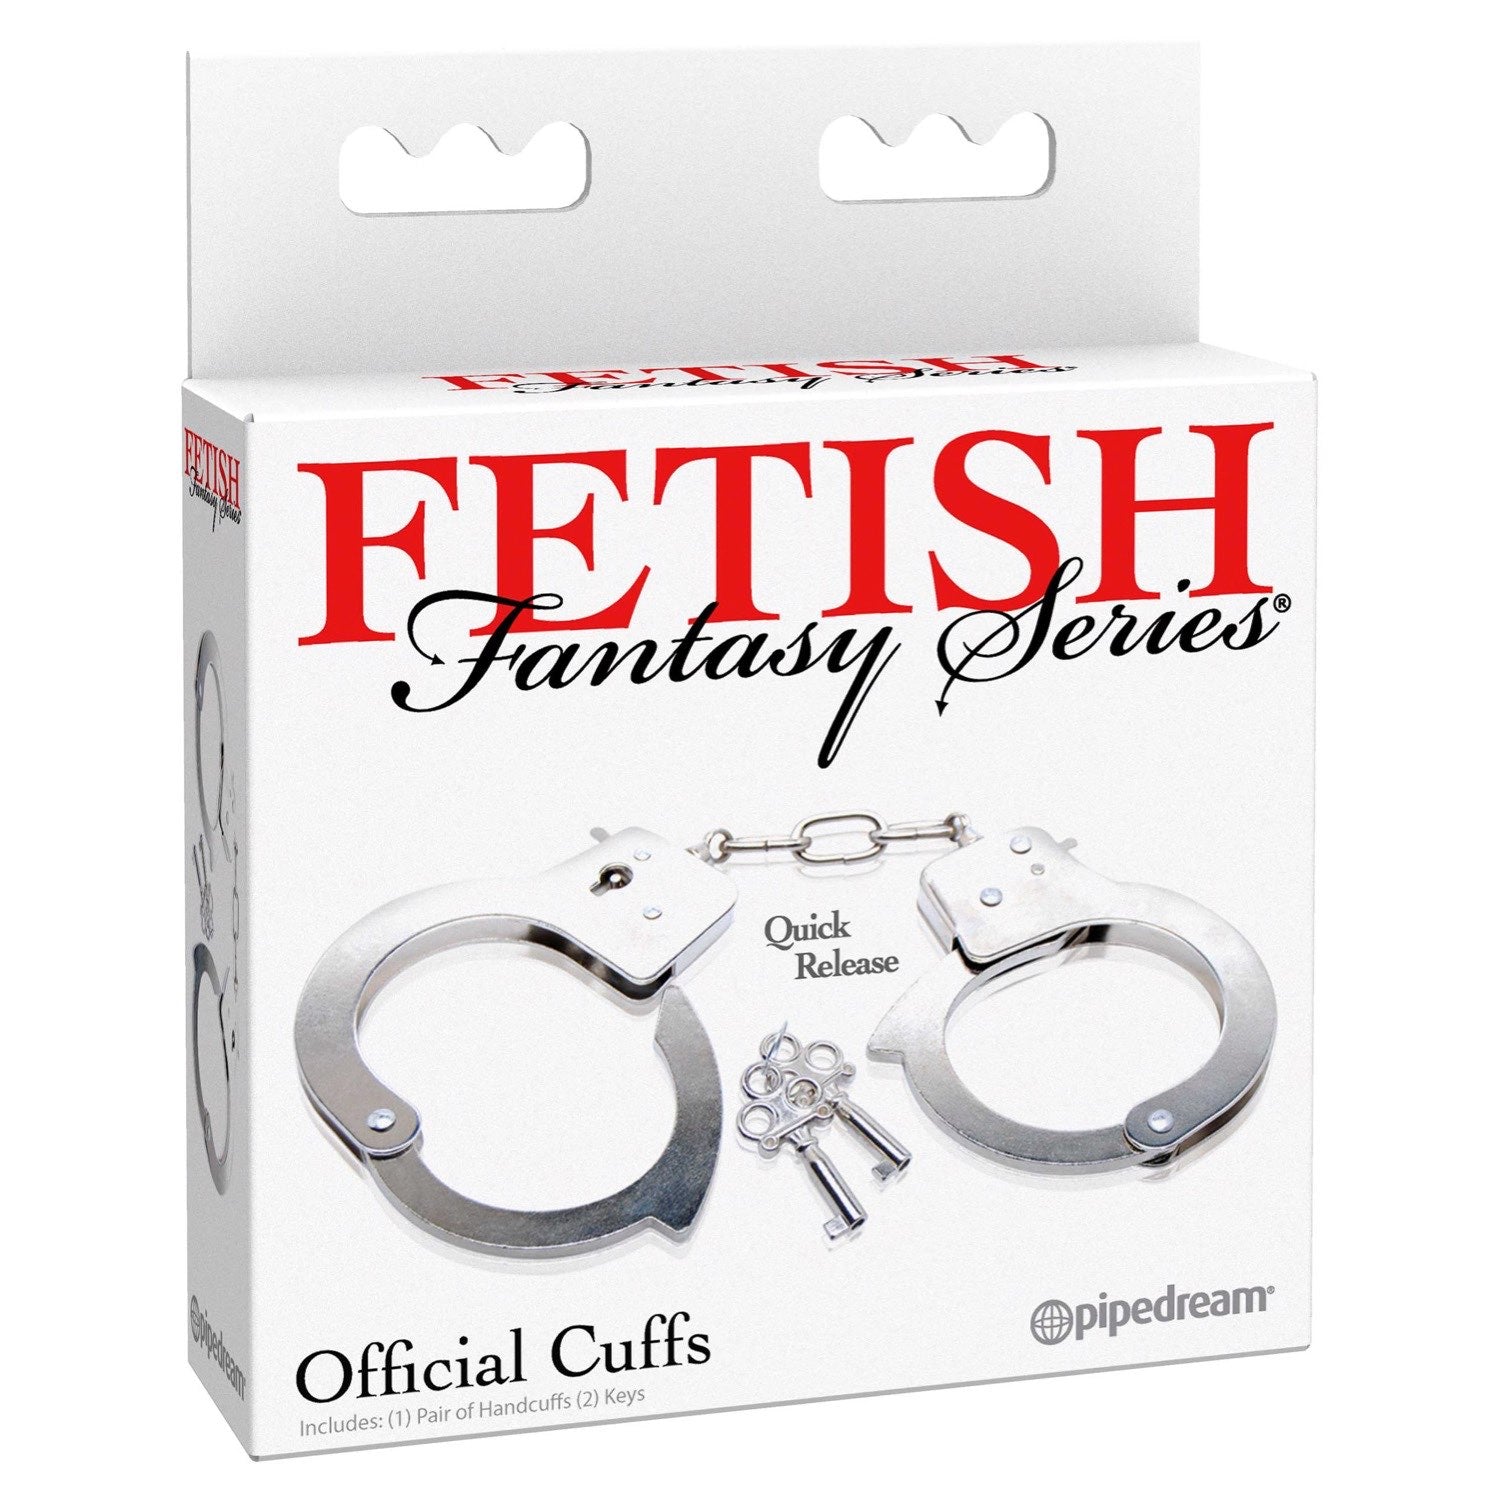 Fetish Fantasy Series Official Handcuffs - Metal Hand Cuffs by Pipedream